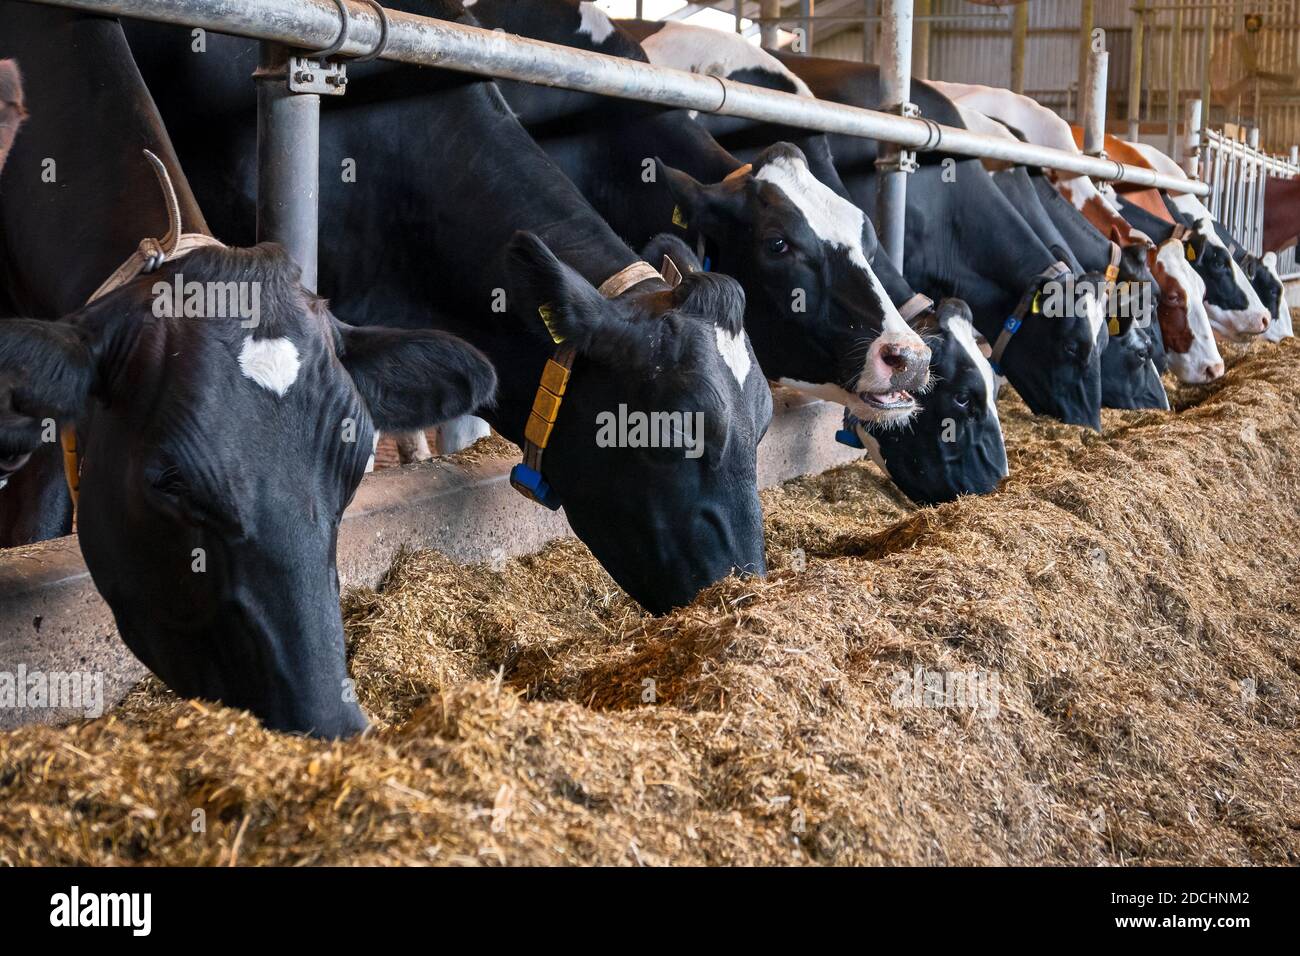 Black and white Holstein Friesian cows at a dairy farm. Stock Photo